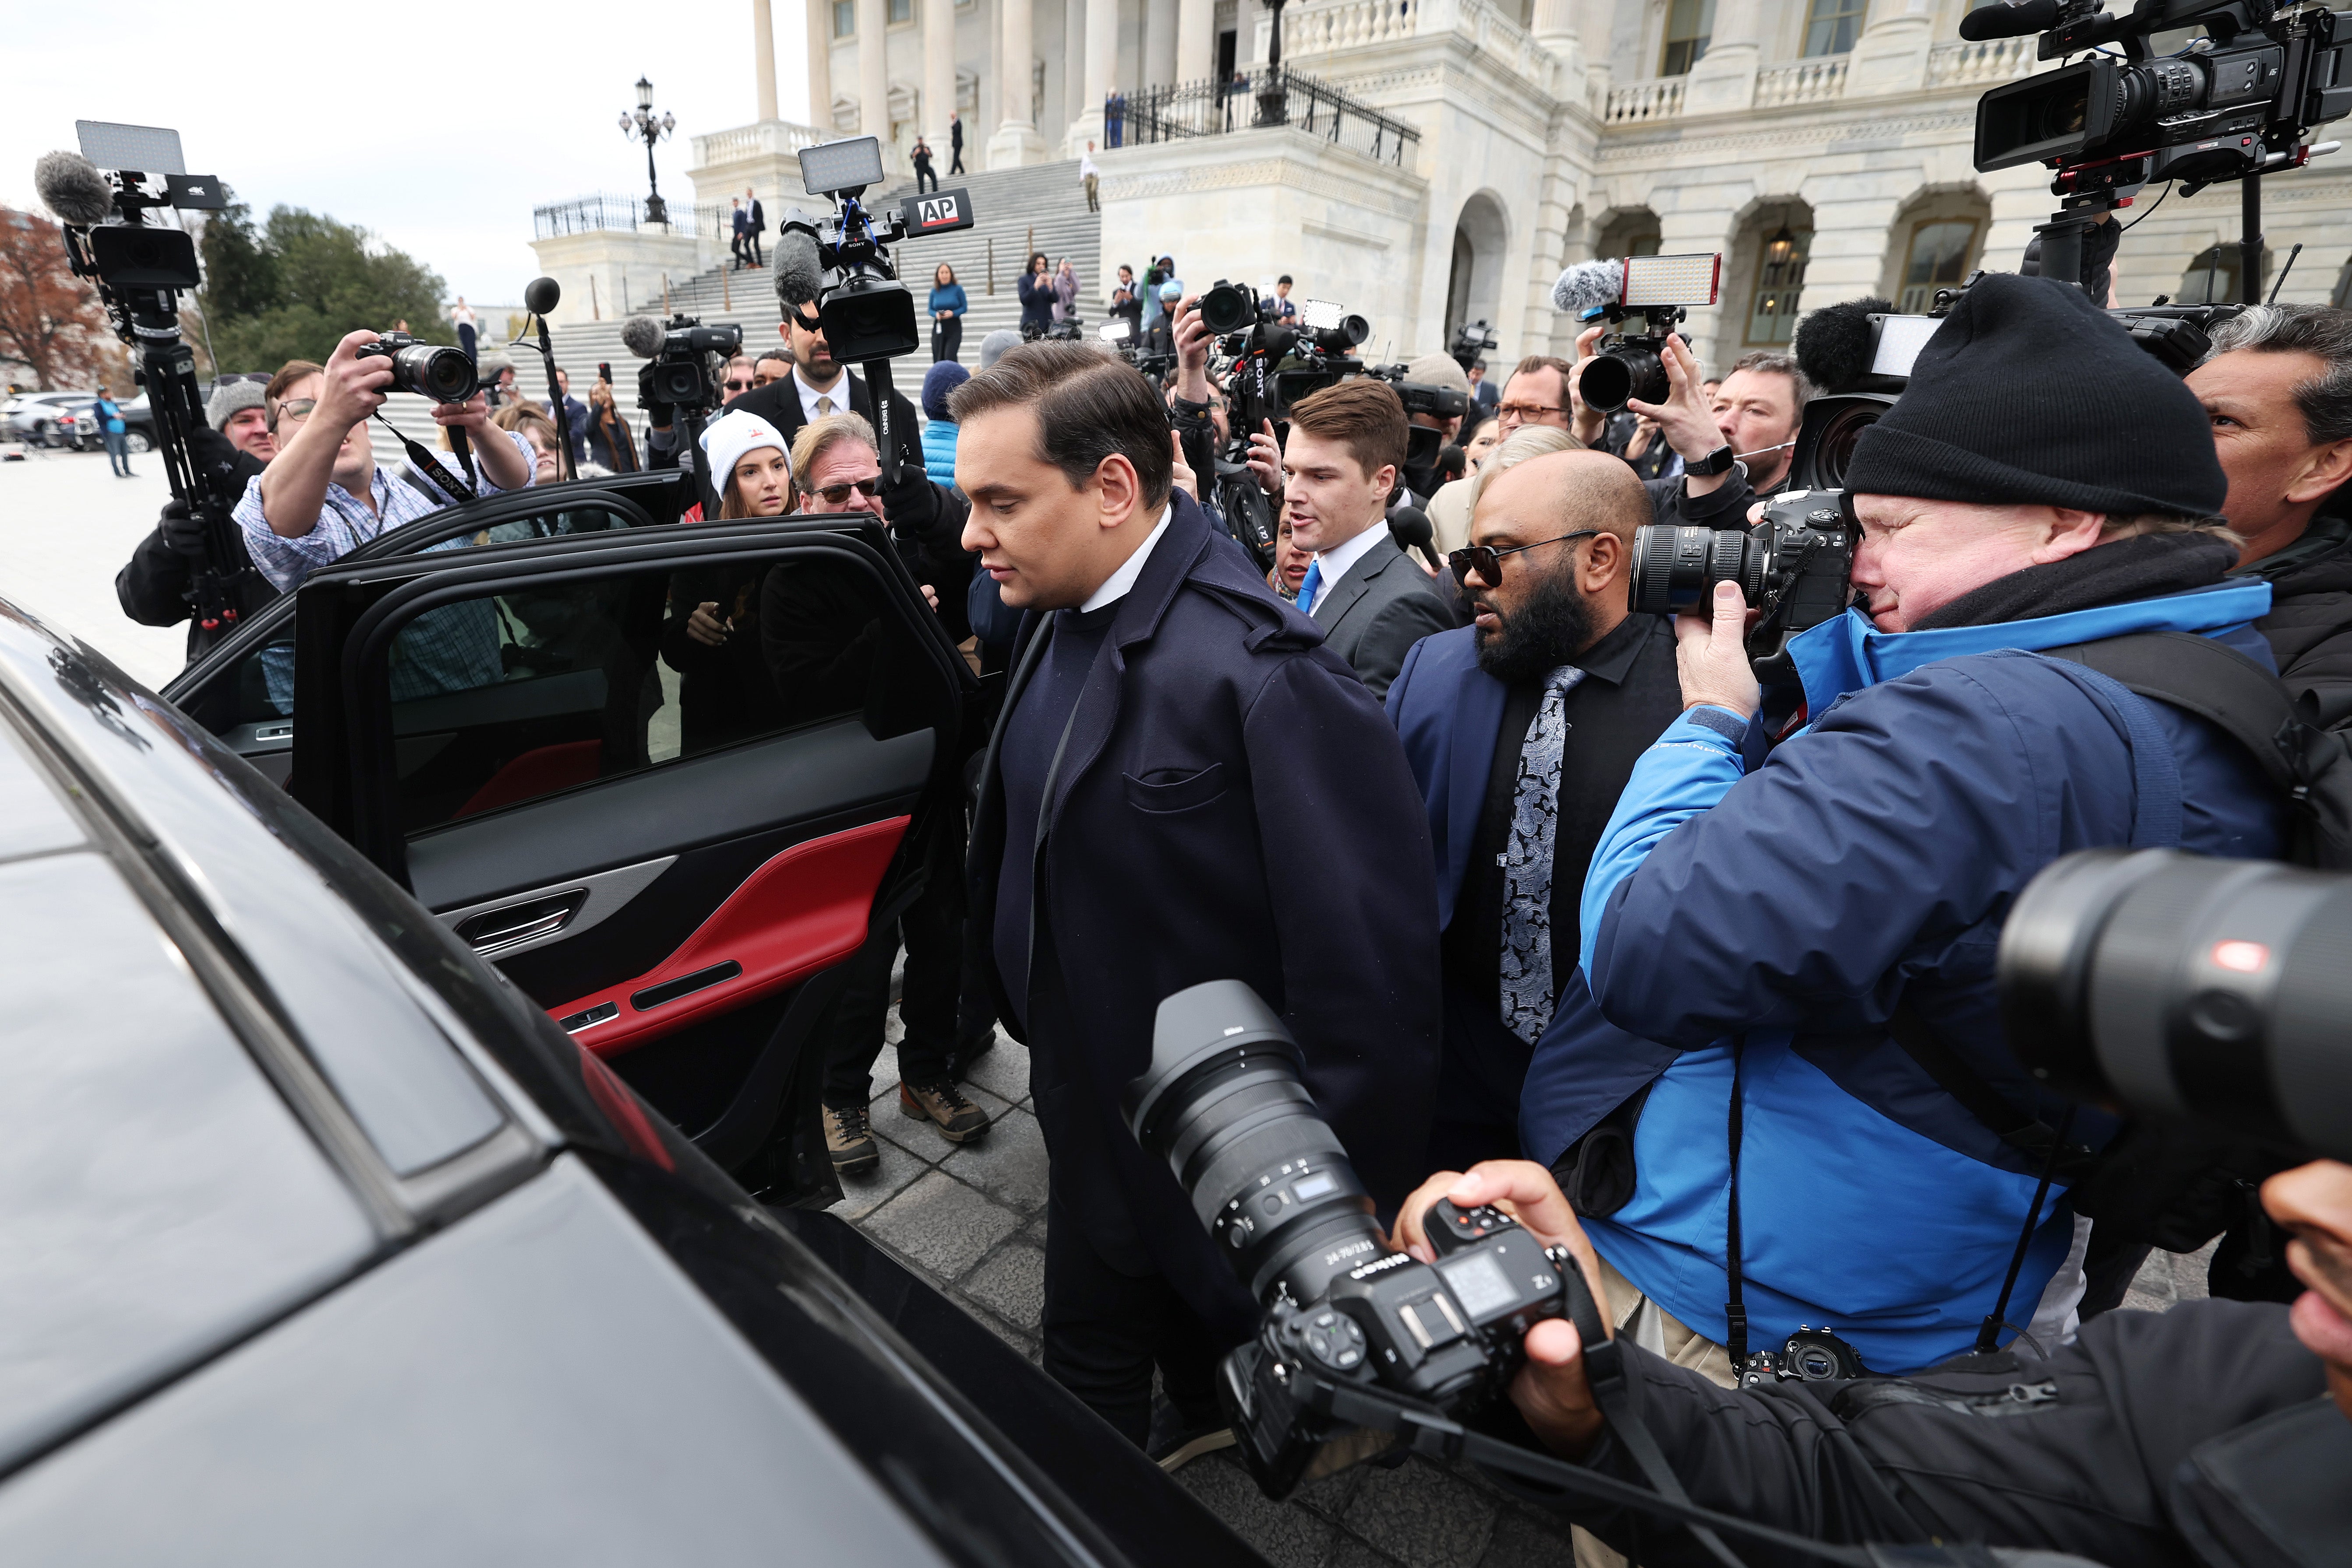 George Santos is surrounded by journalists as he leaves the US Capitol after his fellow members of Congress voted to expel him from the House of Representatives